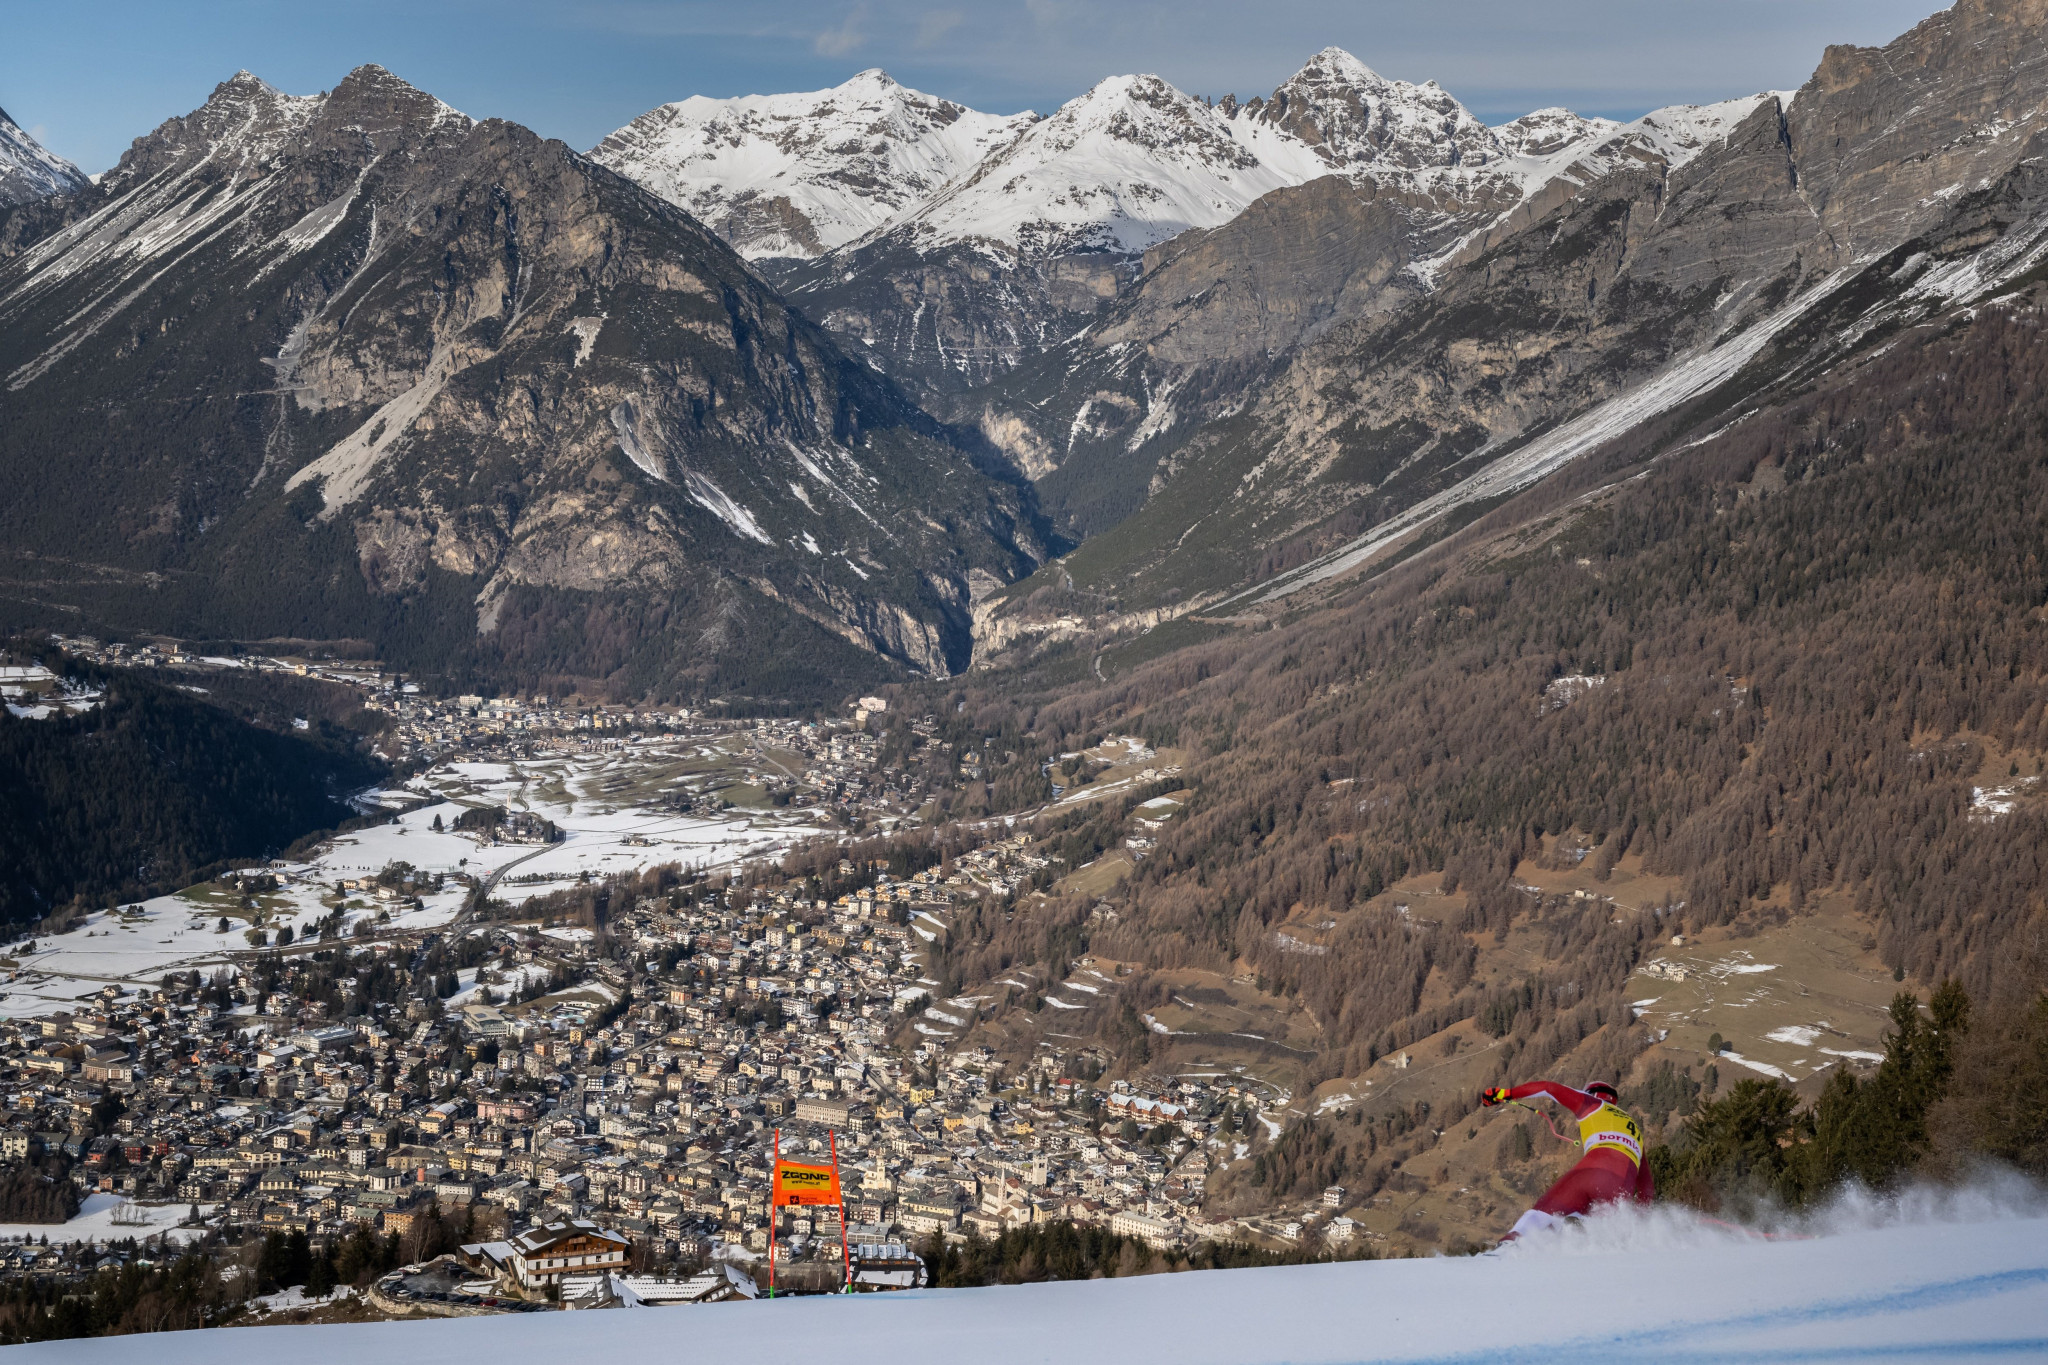 Bormio is set to stage the men's Alpine skiing with Lombardy due to play a key role in the hosting of the 2026 Winter Olympics ©Getty Images